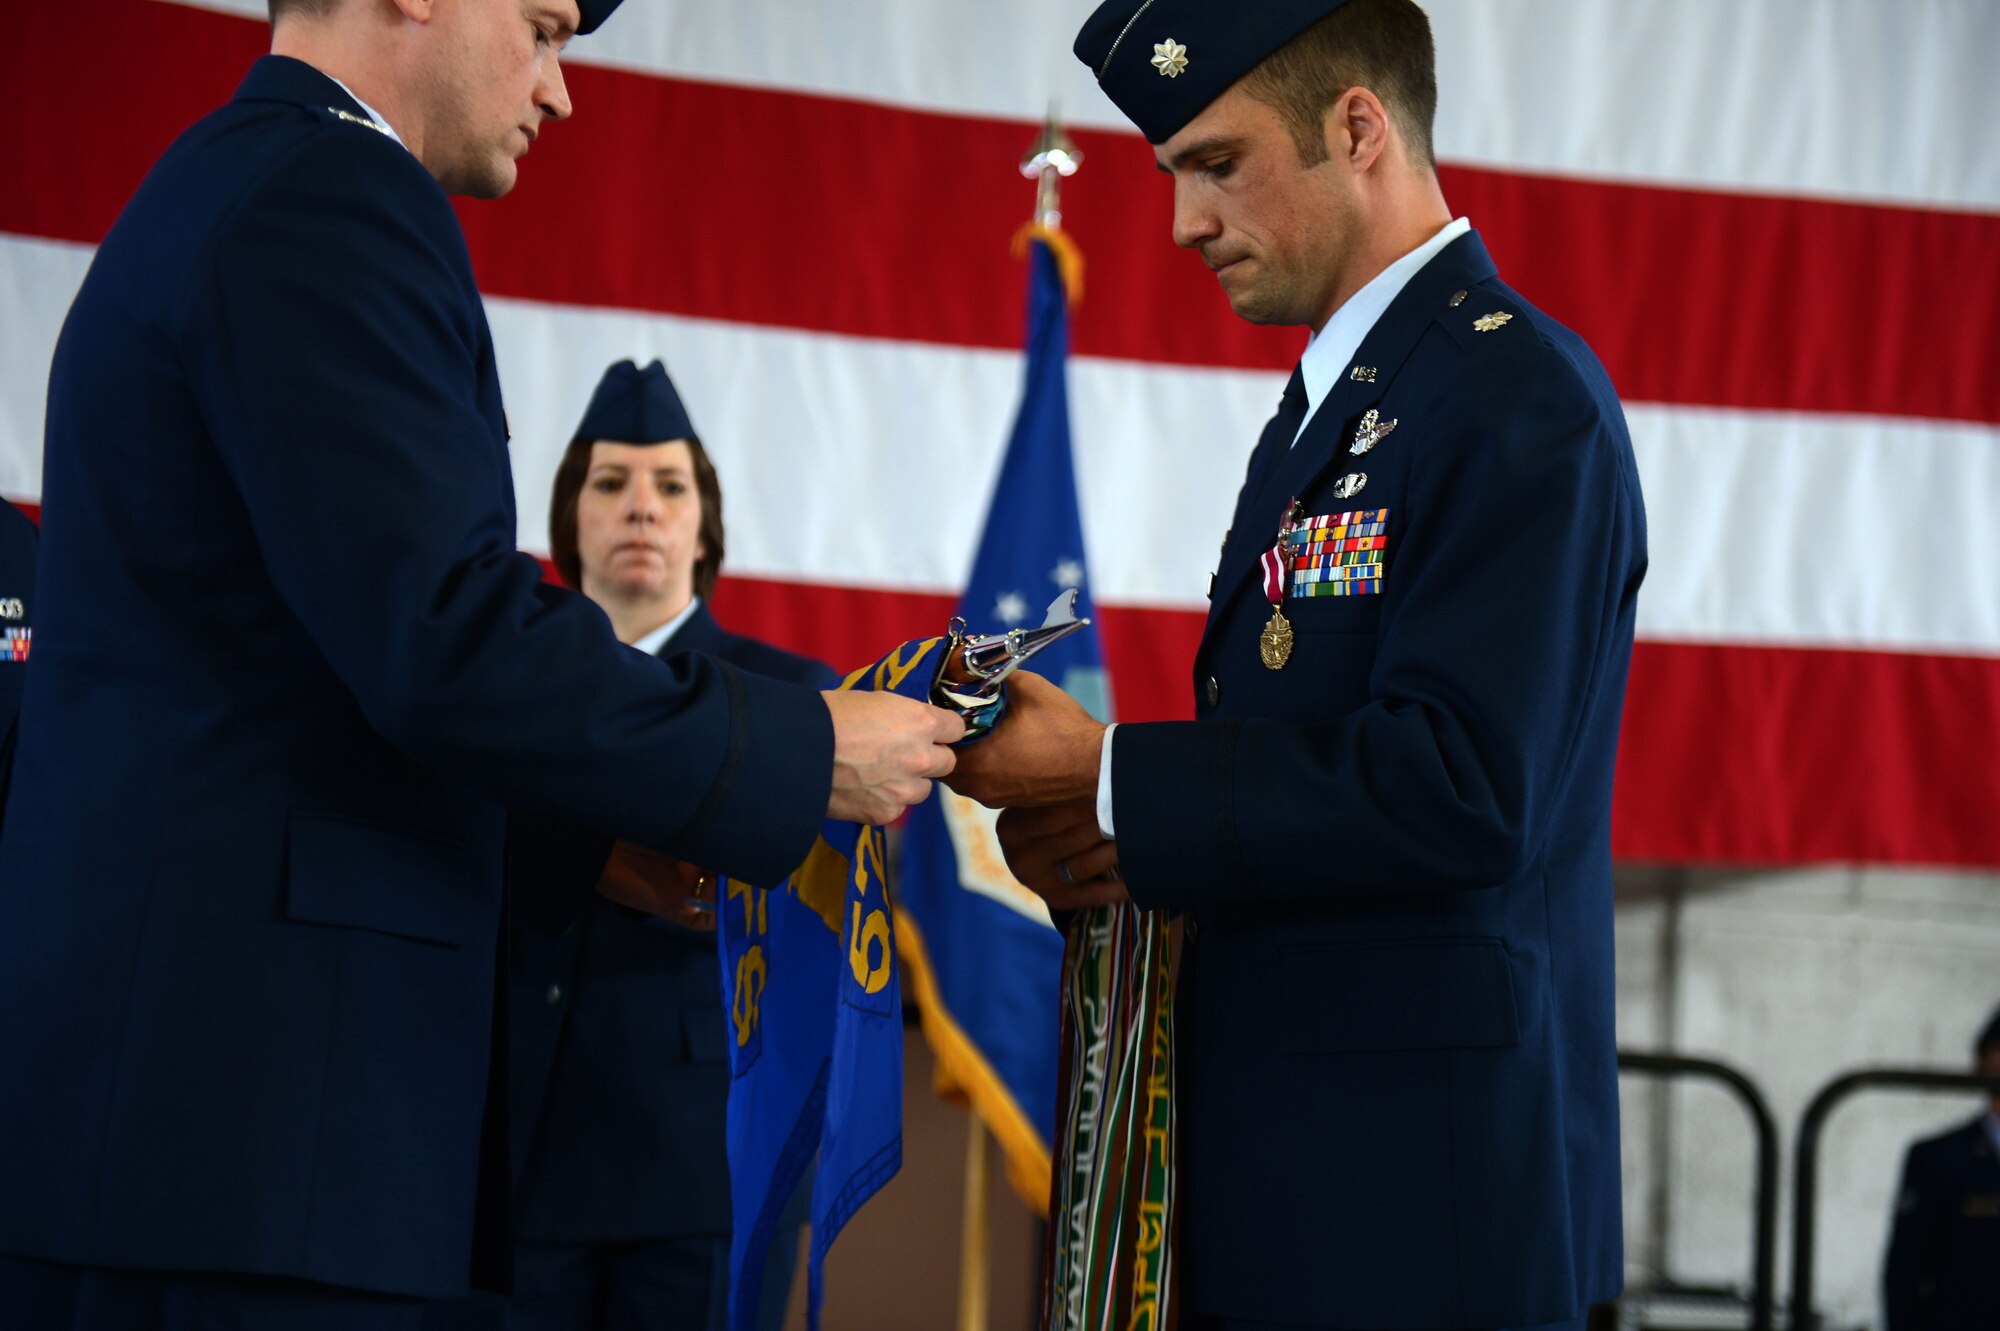 SPANGDAHLEM AIR BASE, Germany – U.S. Air Force Lt. Col. Clint Eichelberger, 81st Fighter Squadron commander, furls the squadron flag during an inactivation ceremony June 18, 2013, at Spangdahlem AB. The rolling and storage of a unit’s guidon honors the tradition and heritage of the Air Force and signifies the closing of a squadron. (U.S. Air Force photo by Airman 1st Class Gustavo Castillo/Released)  